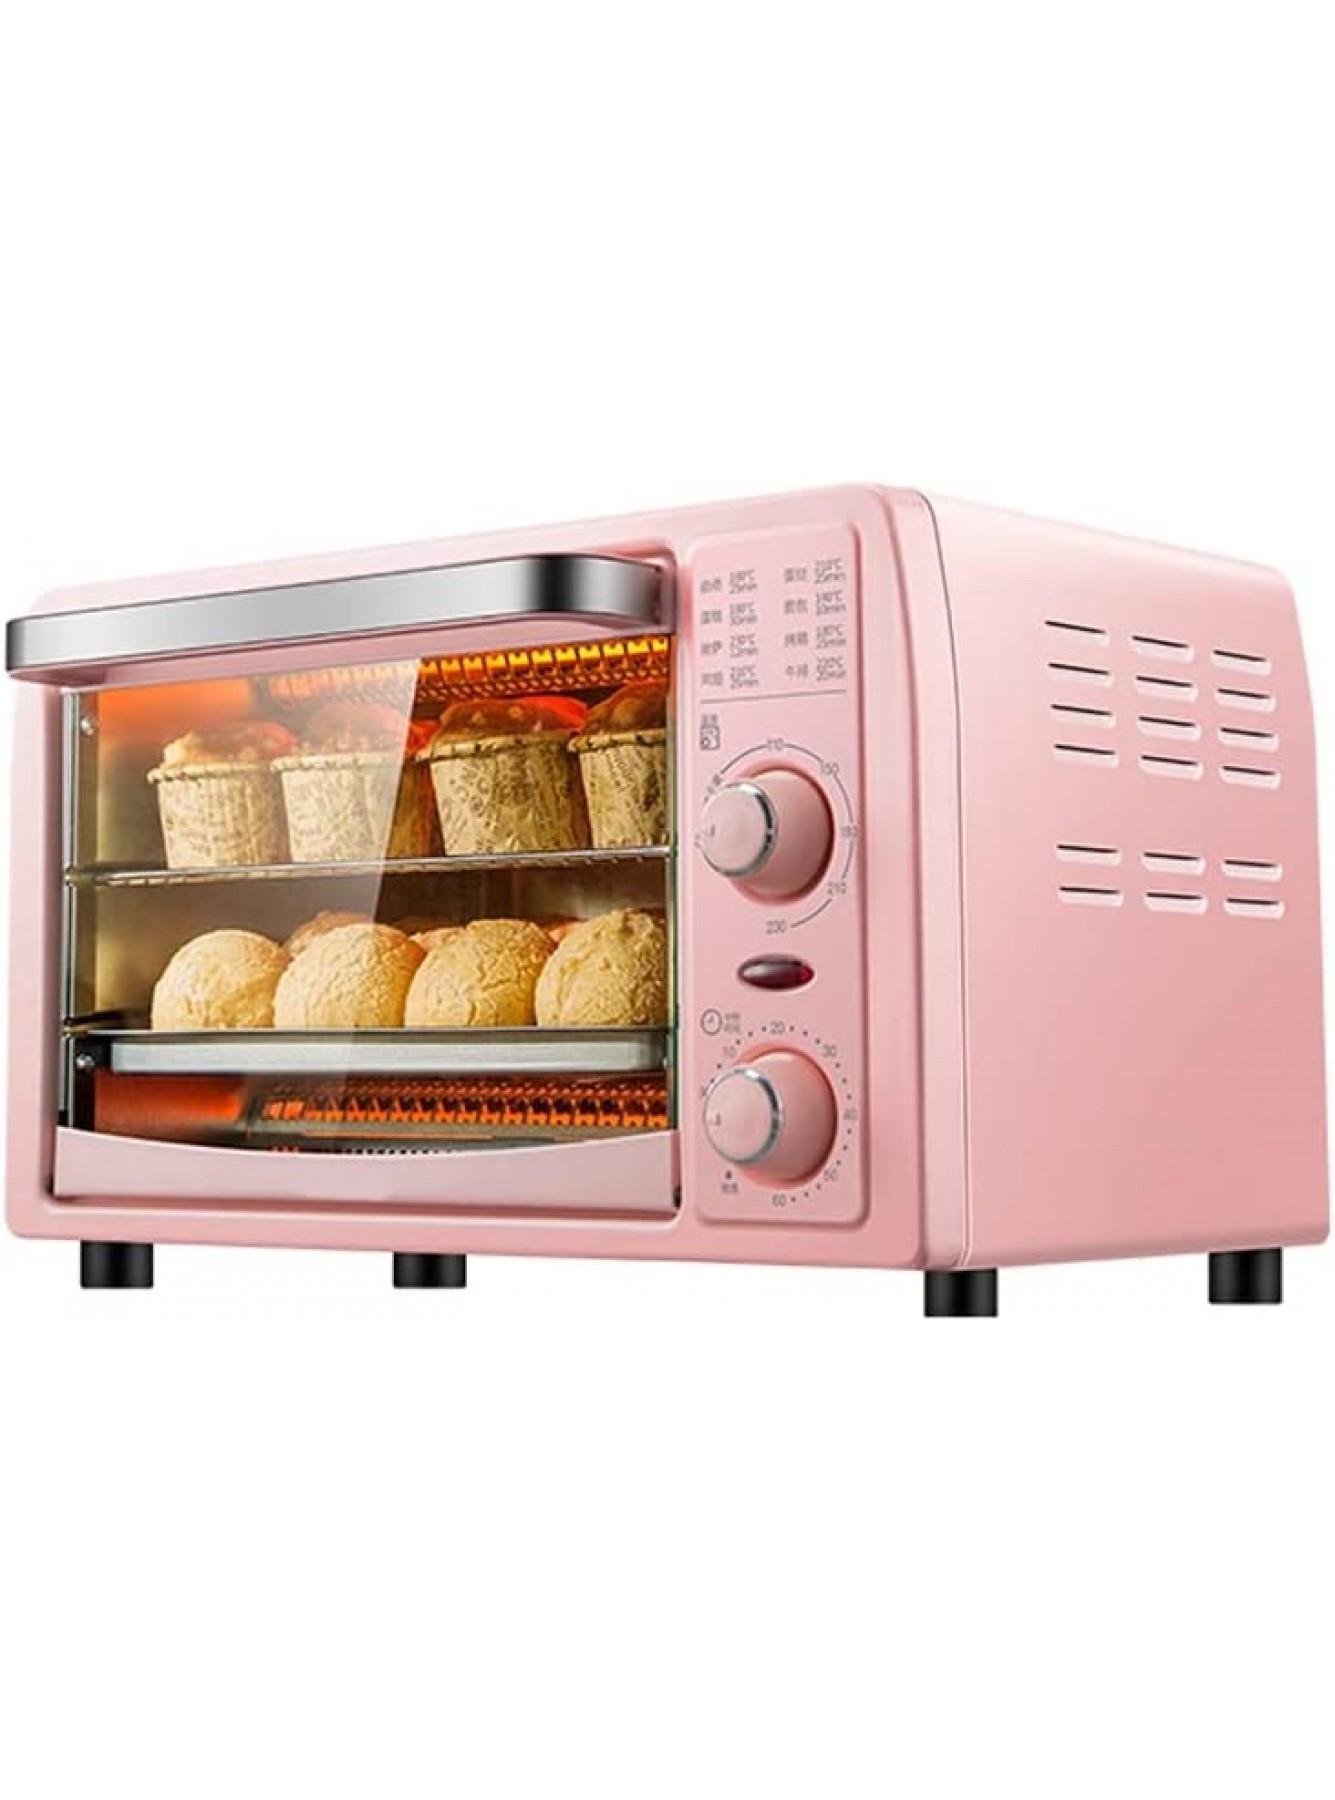 ALOW Electric Oven 13L Multifunctional Mini Oven Frying Pan Baking Machine Household Pizza Maker Fruit Barbecue Toaster Oven B09NVTVWHN